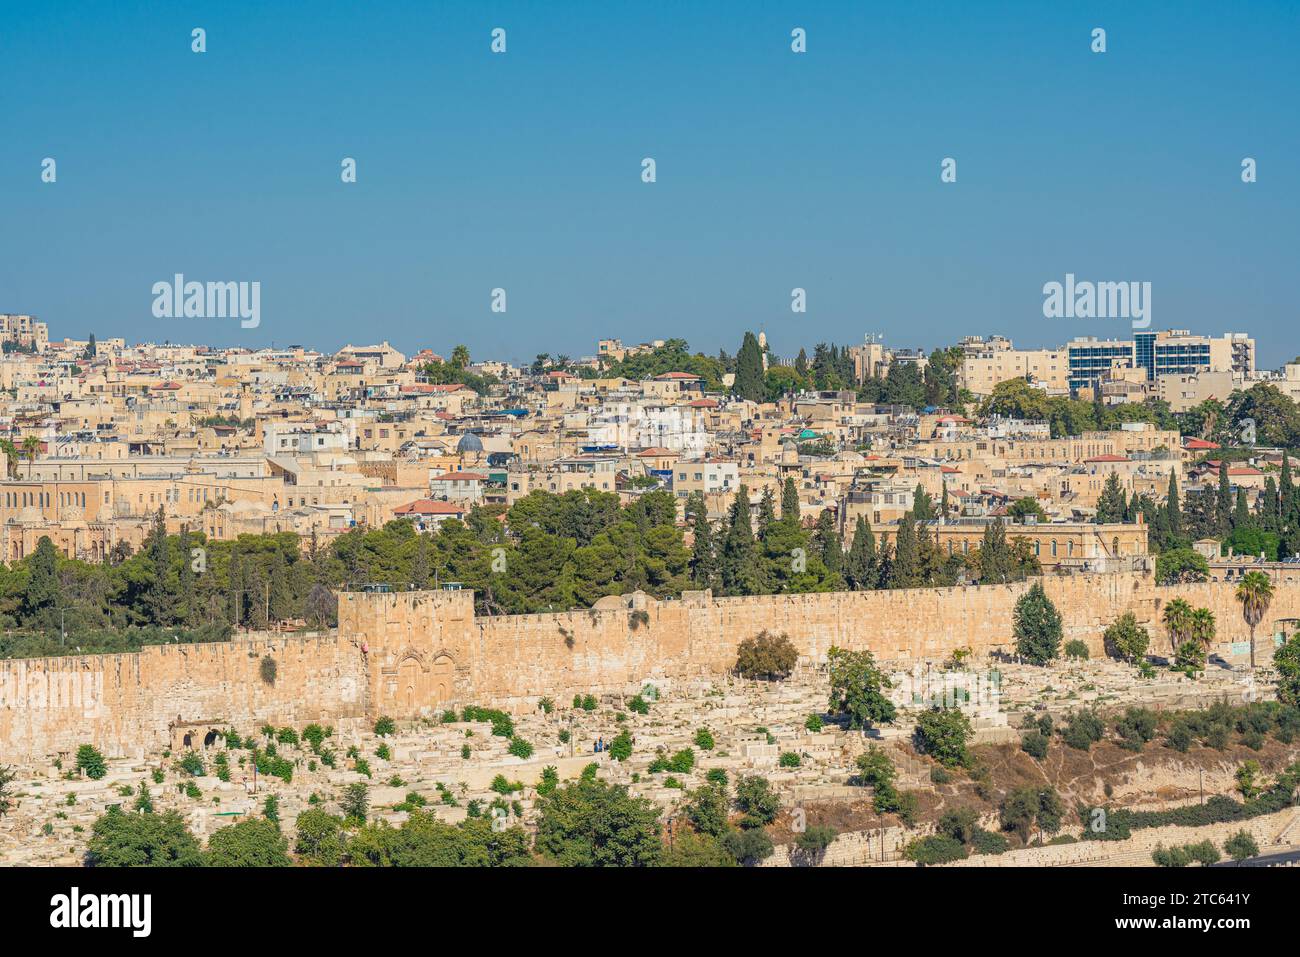 View of the Golden Gate, a historical landmark, on the East side of the walls of the Temple Mount, Old City of Jerusalem Stock Photo